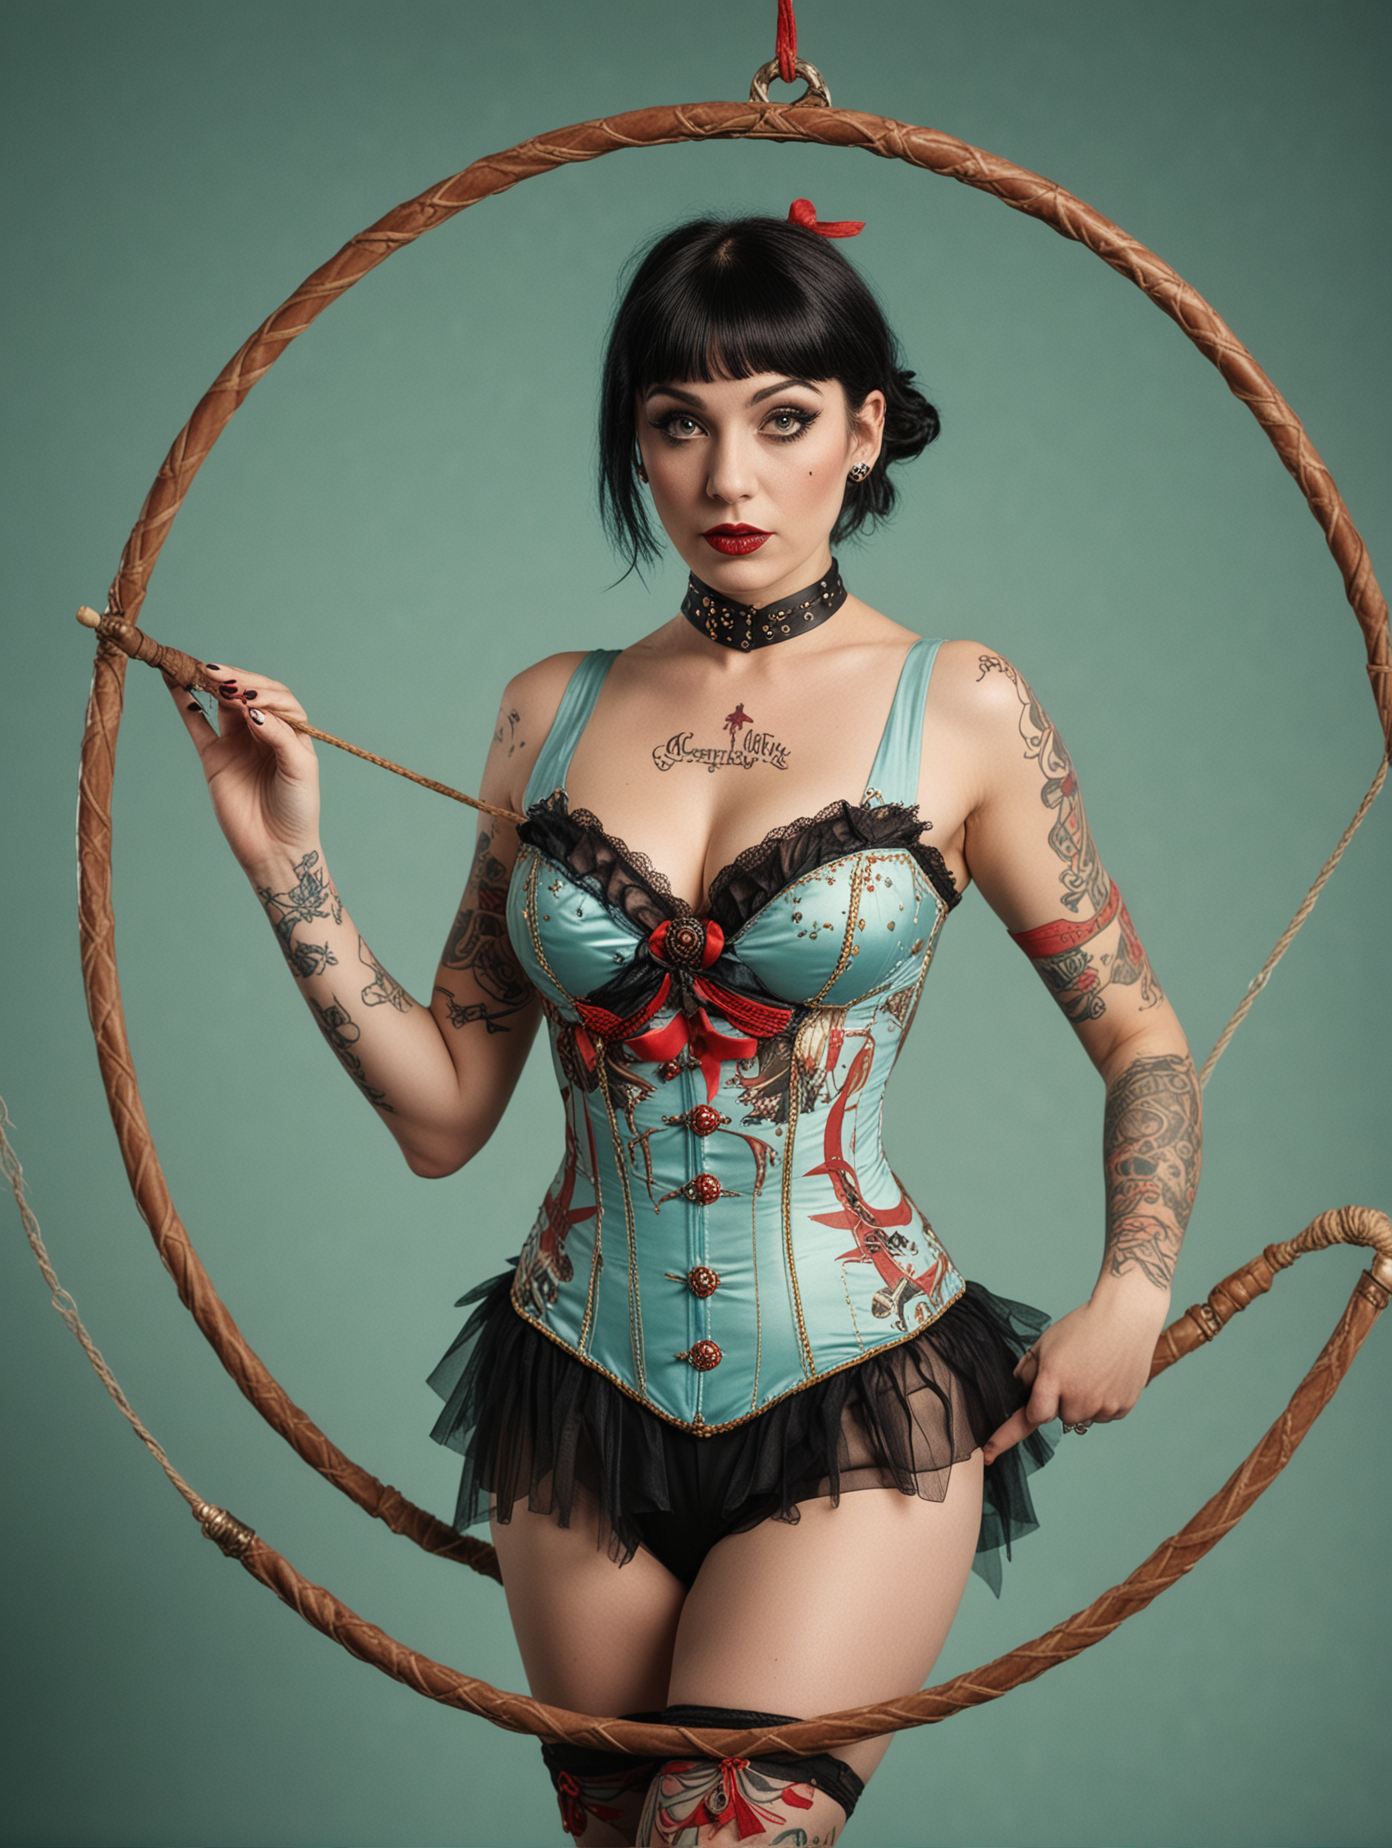 circus, in the style of whimsical yet eerie symbolism, American 1920's circus, light cyan and red palette, close up portraiture, well built busty female acrobat with black hair, wearing a pirate themed outfit, leotard and tutu, covered in tatoos, holding an aerial hoop, nature-inspired pieces, circus costumes, ultra details